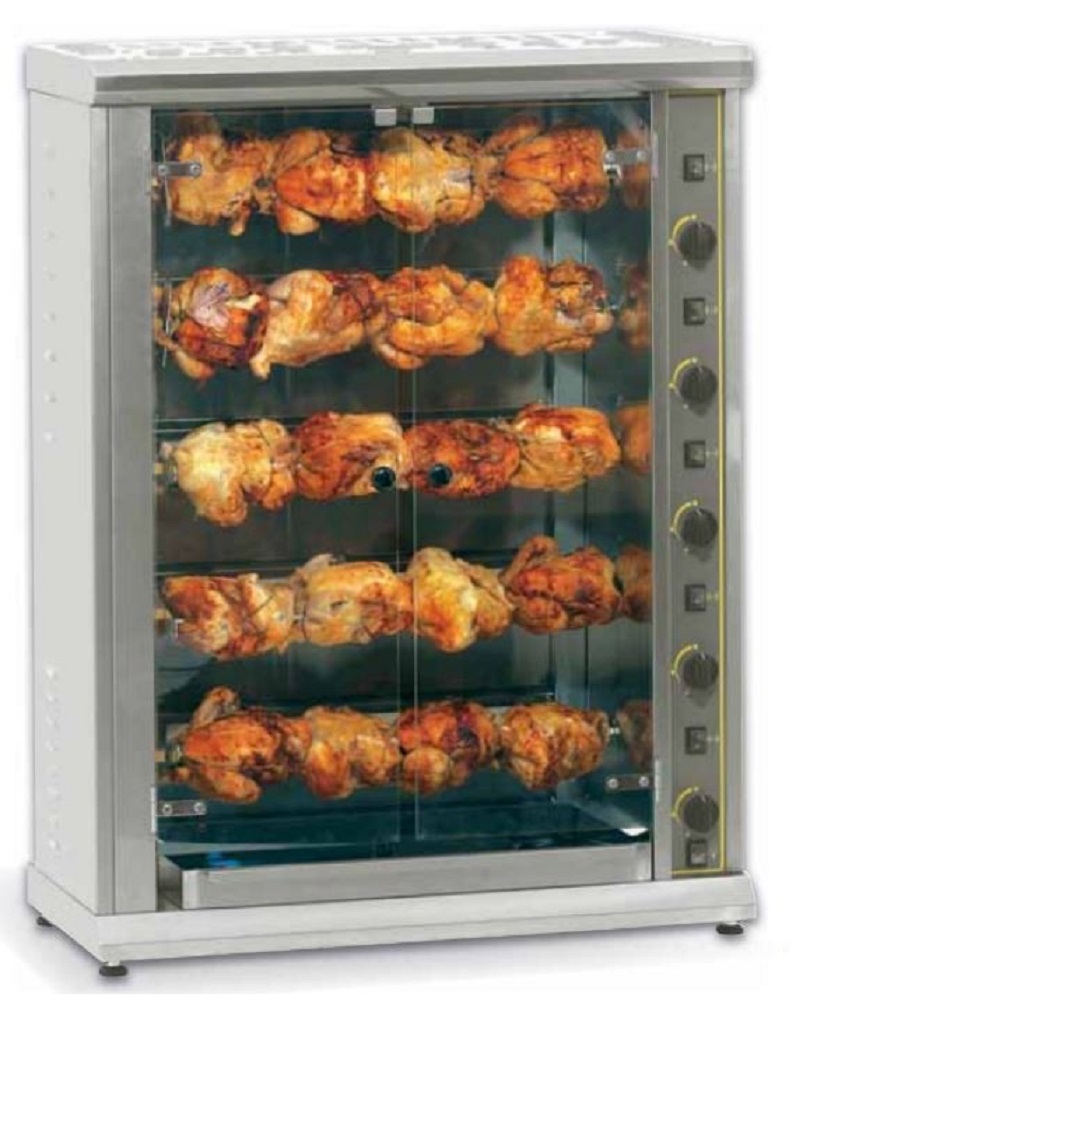 Roller Grill RBE 200Q High Capacity Electric Rotisserie